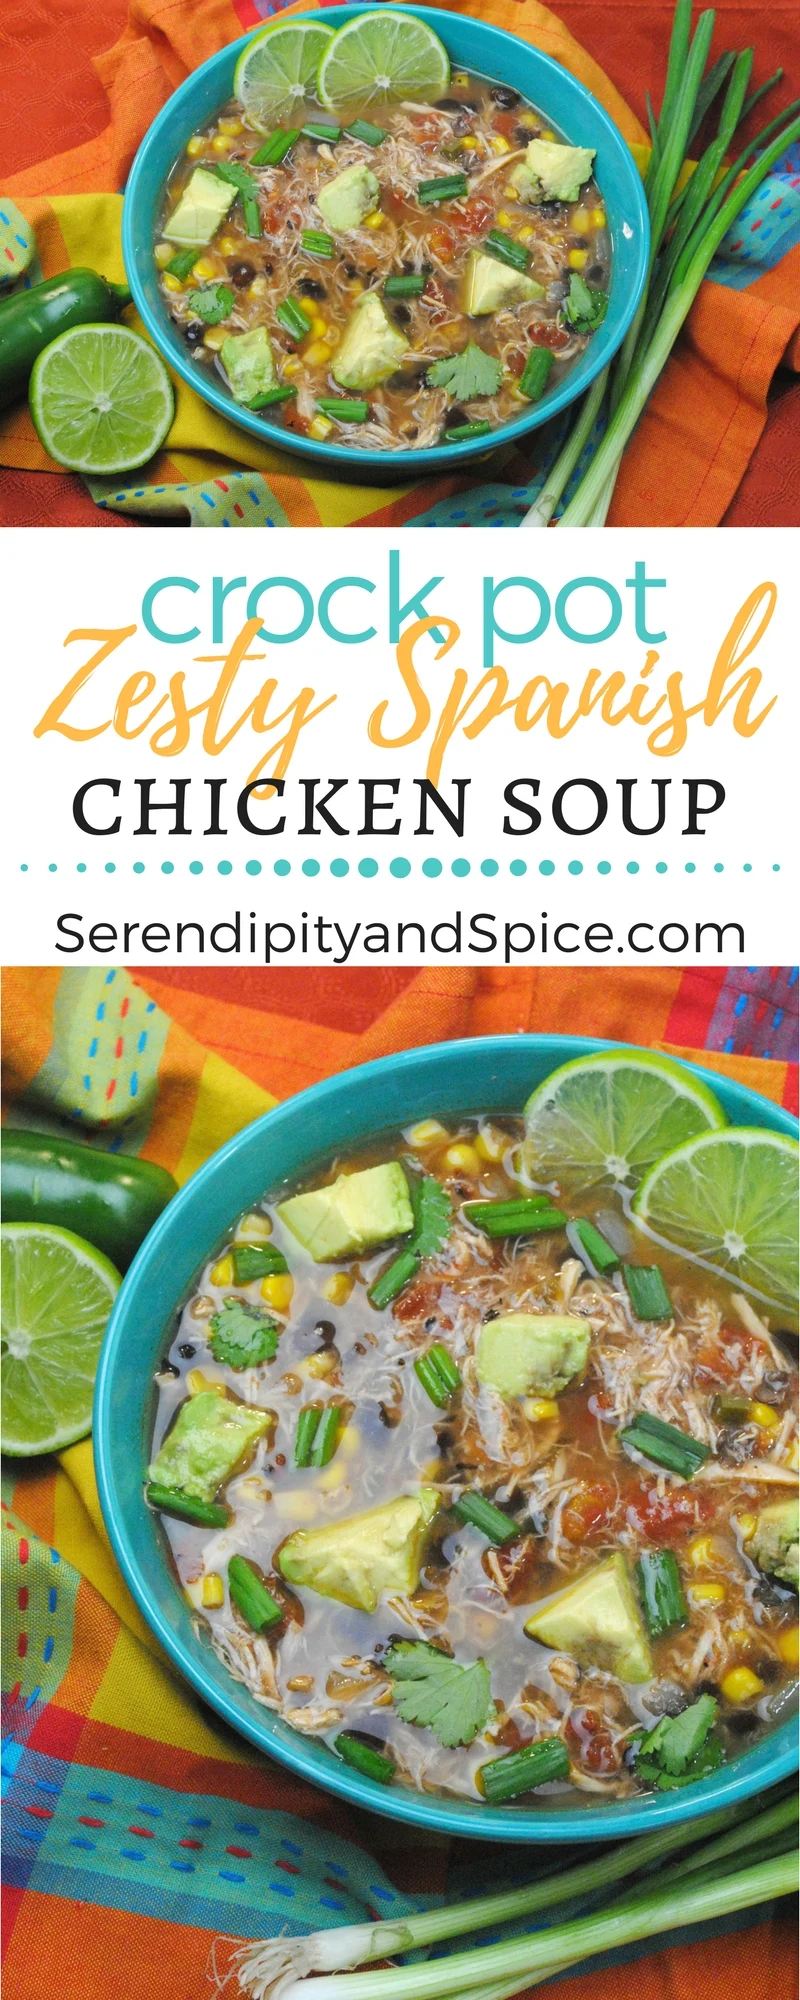 chicken soup Spanish Slow Cooker Chicken Soup This slow cooker chicken soup recipe has the perfect blend of Spanish influence making it a fun twist on a classic soup.  Make this Spanish slow cooker chicken soup to surprise the family tonight! Y'all know I love my slow cooker recipes!